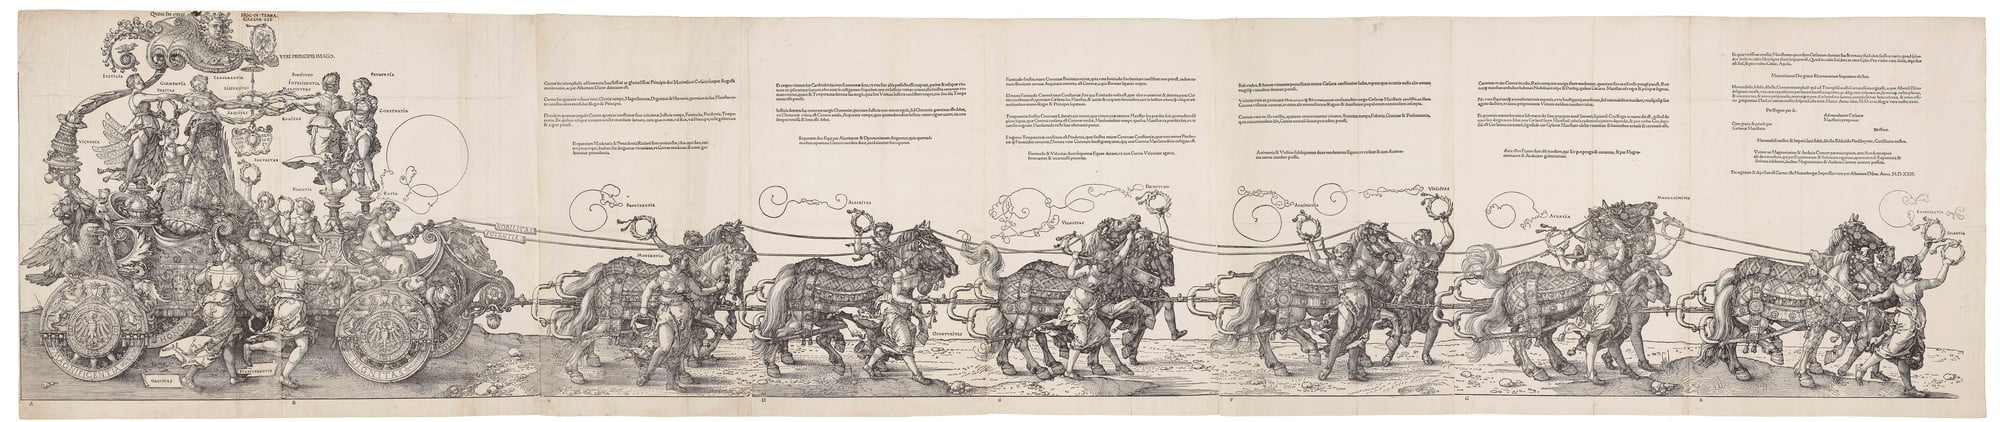 A woodcut showing the Emperor Maximilian in a triumphal chariot.
This large woodcut, over 2 metres in length, was originally planned as part of a huge printed frieze. The work, undertaken by a team of designers and woodblock cutters, was to show a triumph